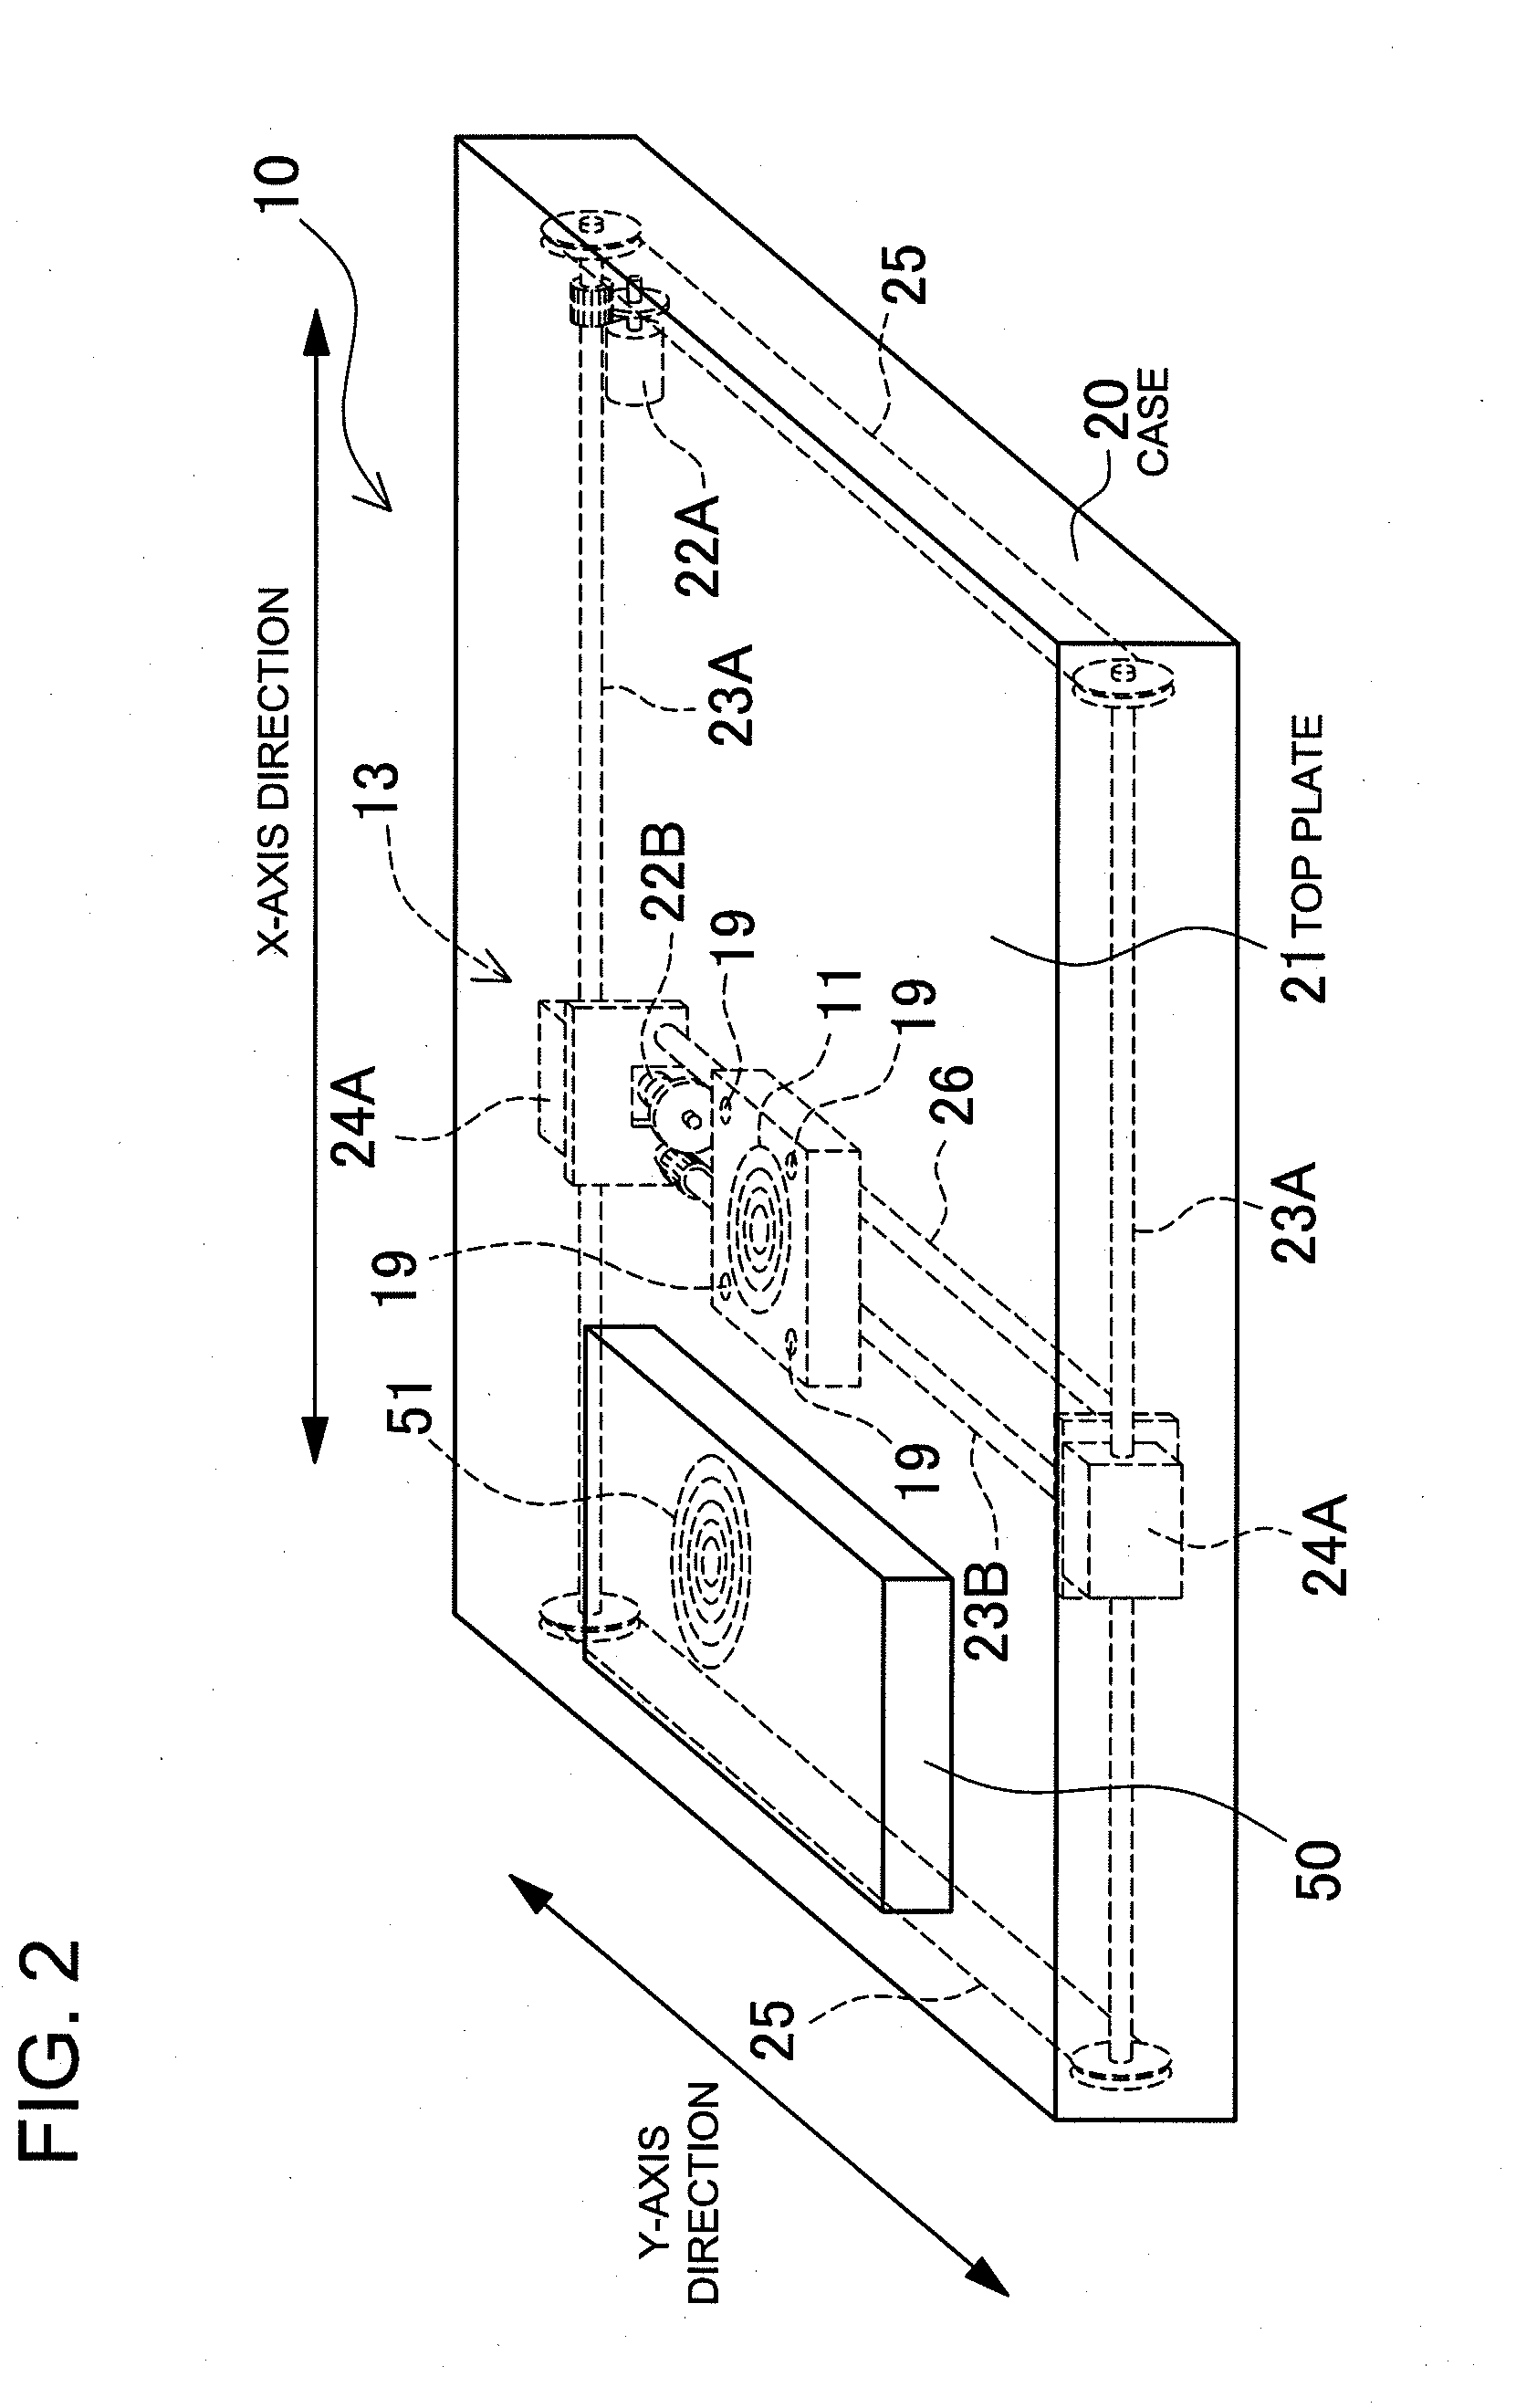 Device housing a battery and charging pad